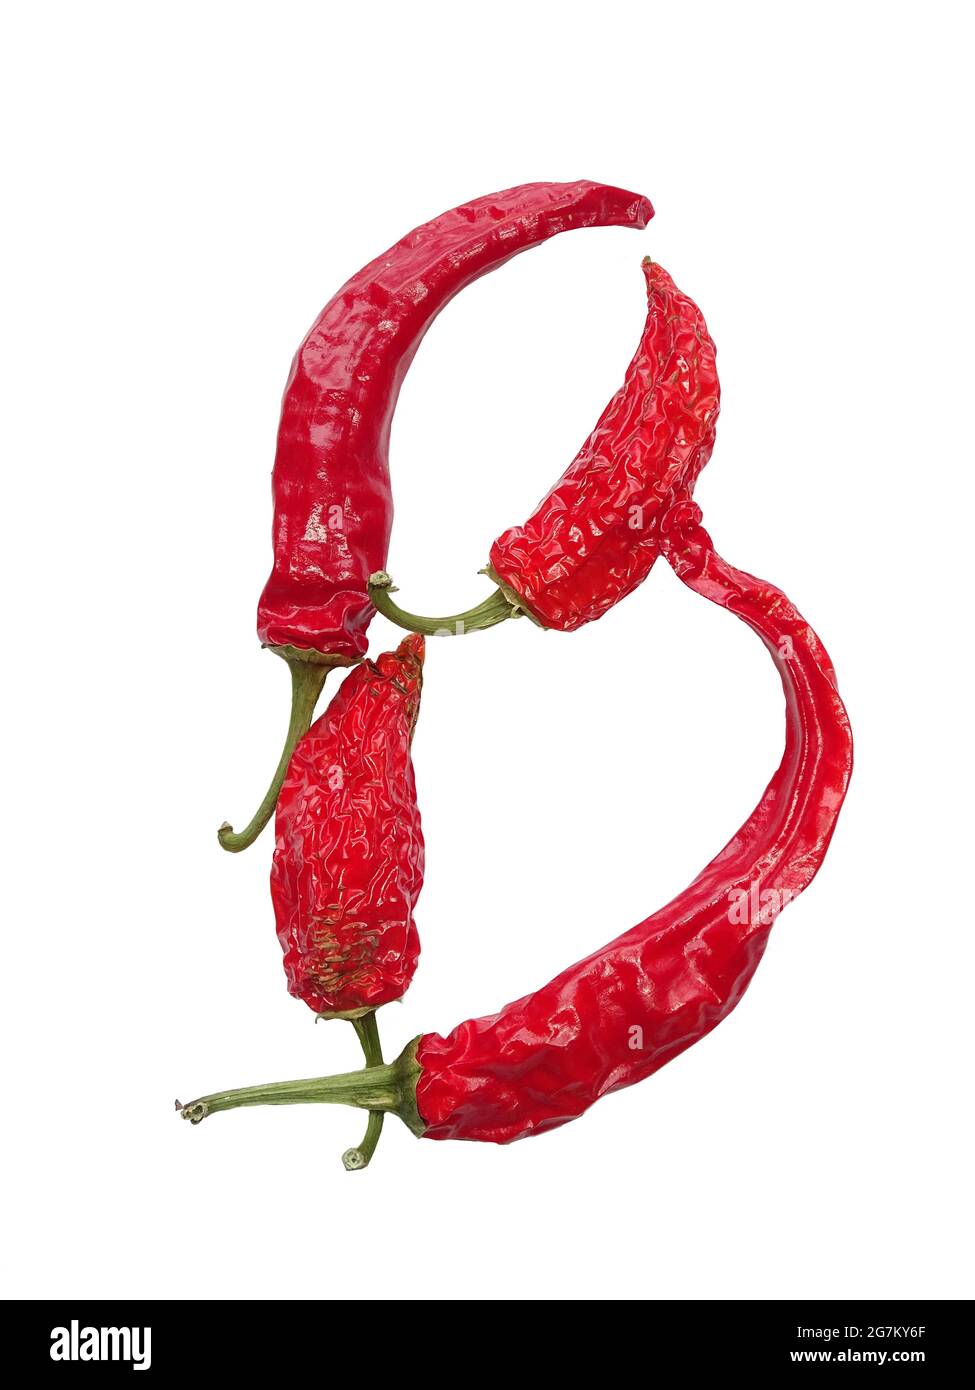 Letter B of the alphabet made with red pepper, isolated on a white background Stock Photo